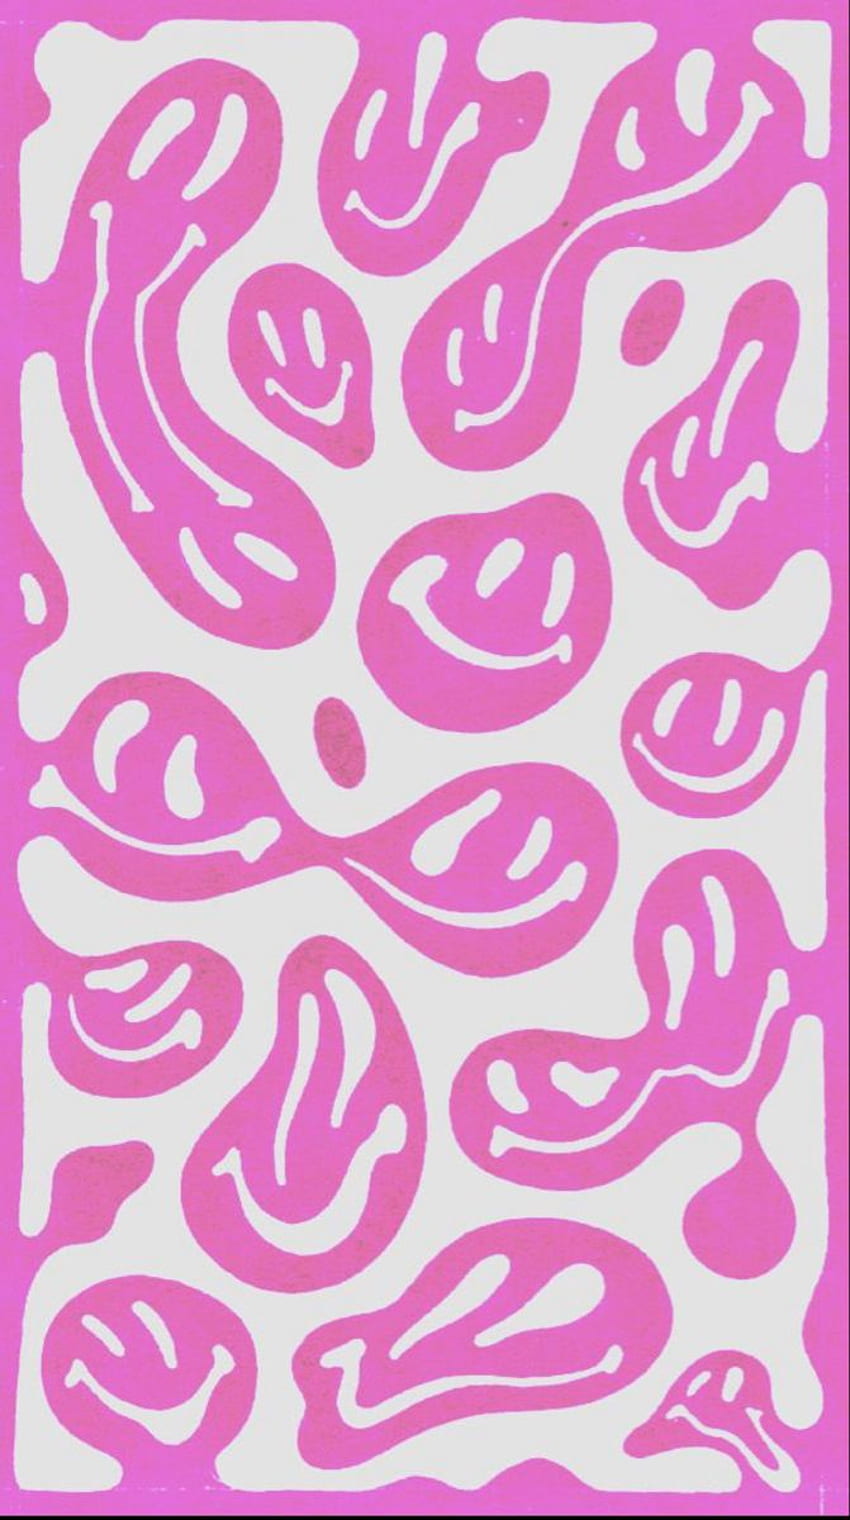 Melting Smiley Faces Aesthetic Pic System, Trippy Face HD phone wallpaper